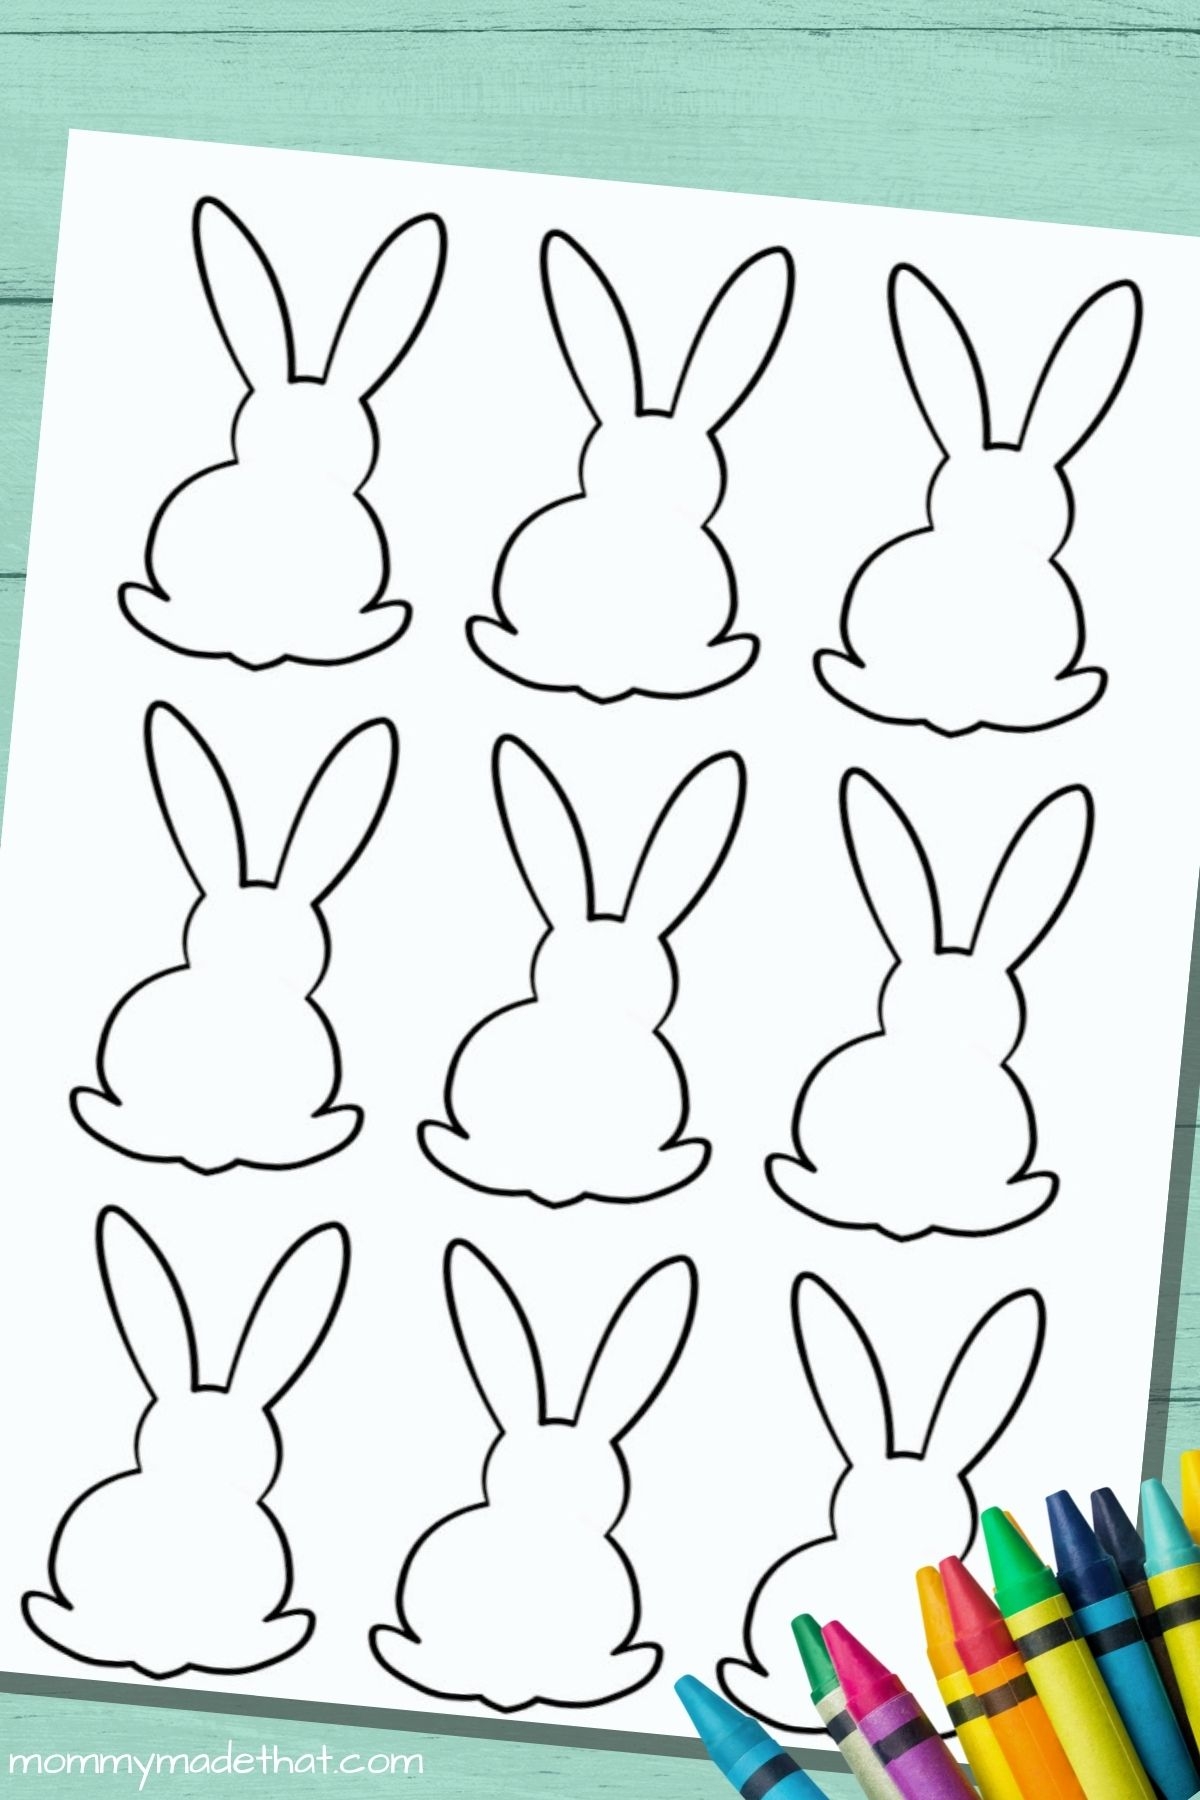 Free Bunny Rabbit Templates Tons Of Shapes Sizes - Free Printable Bunny Pictures